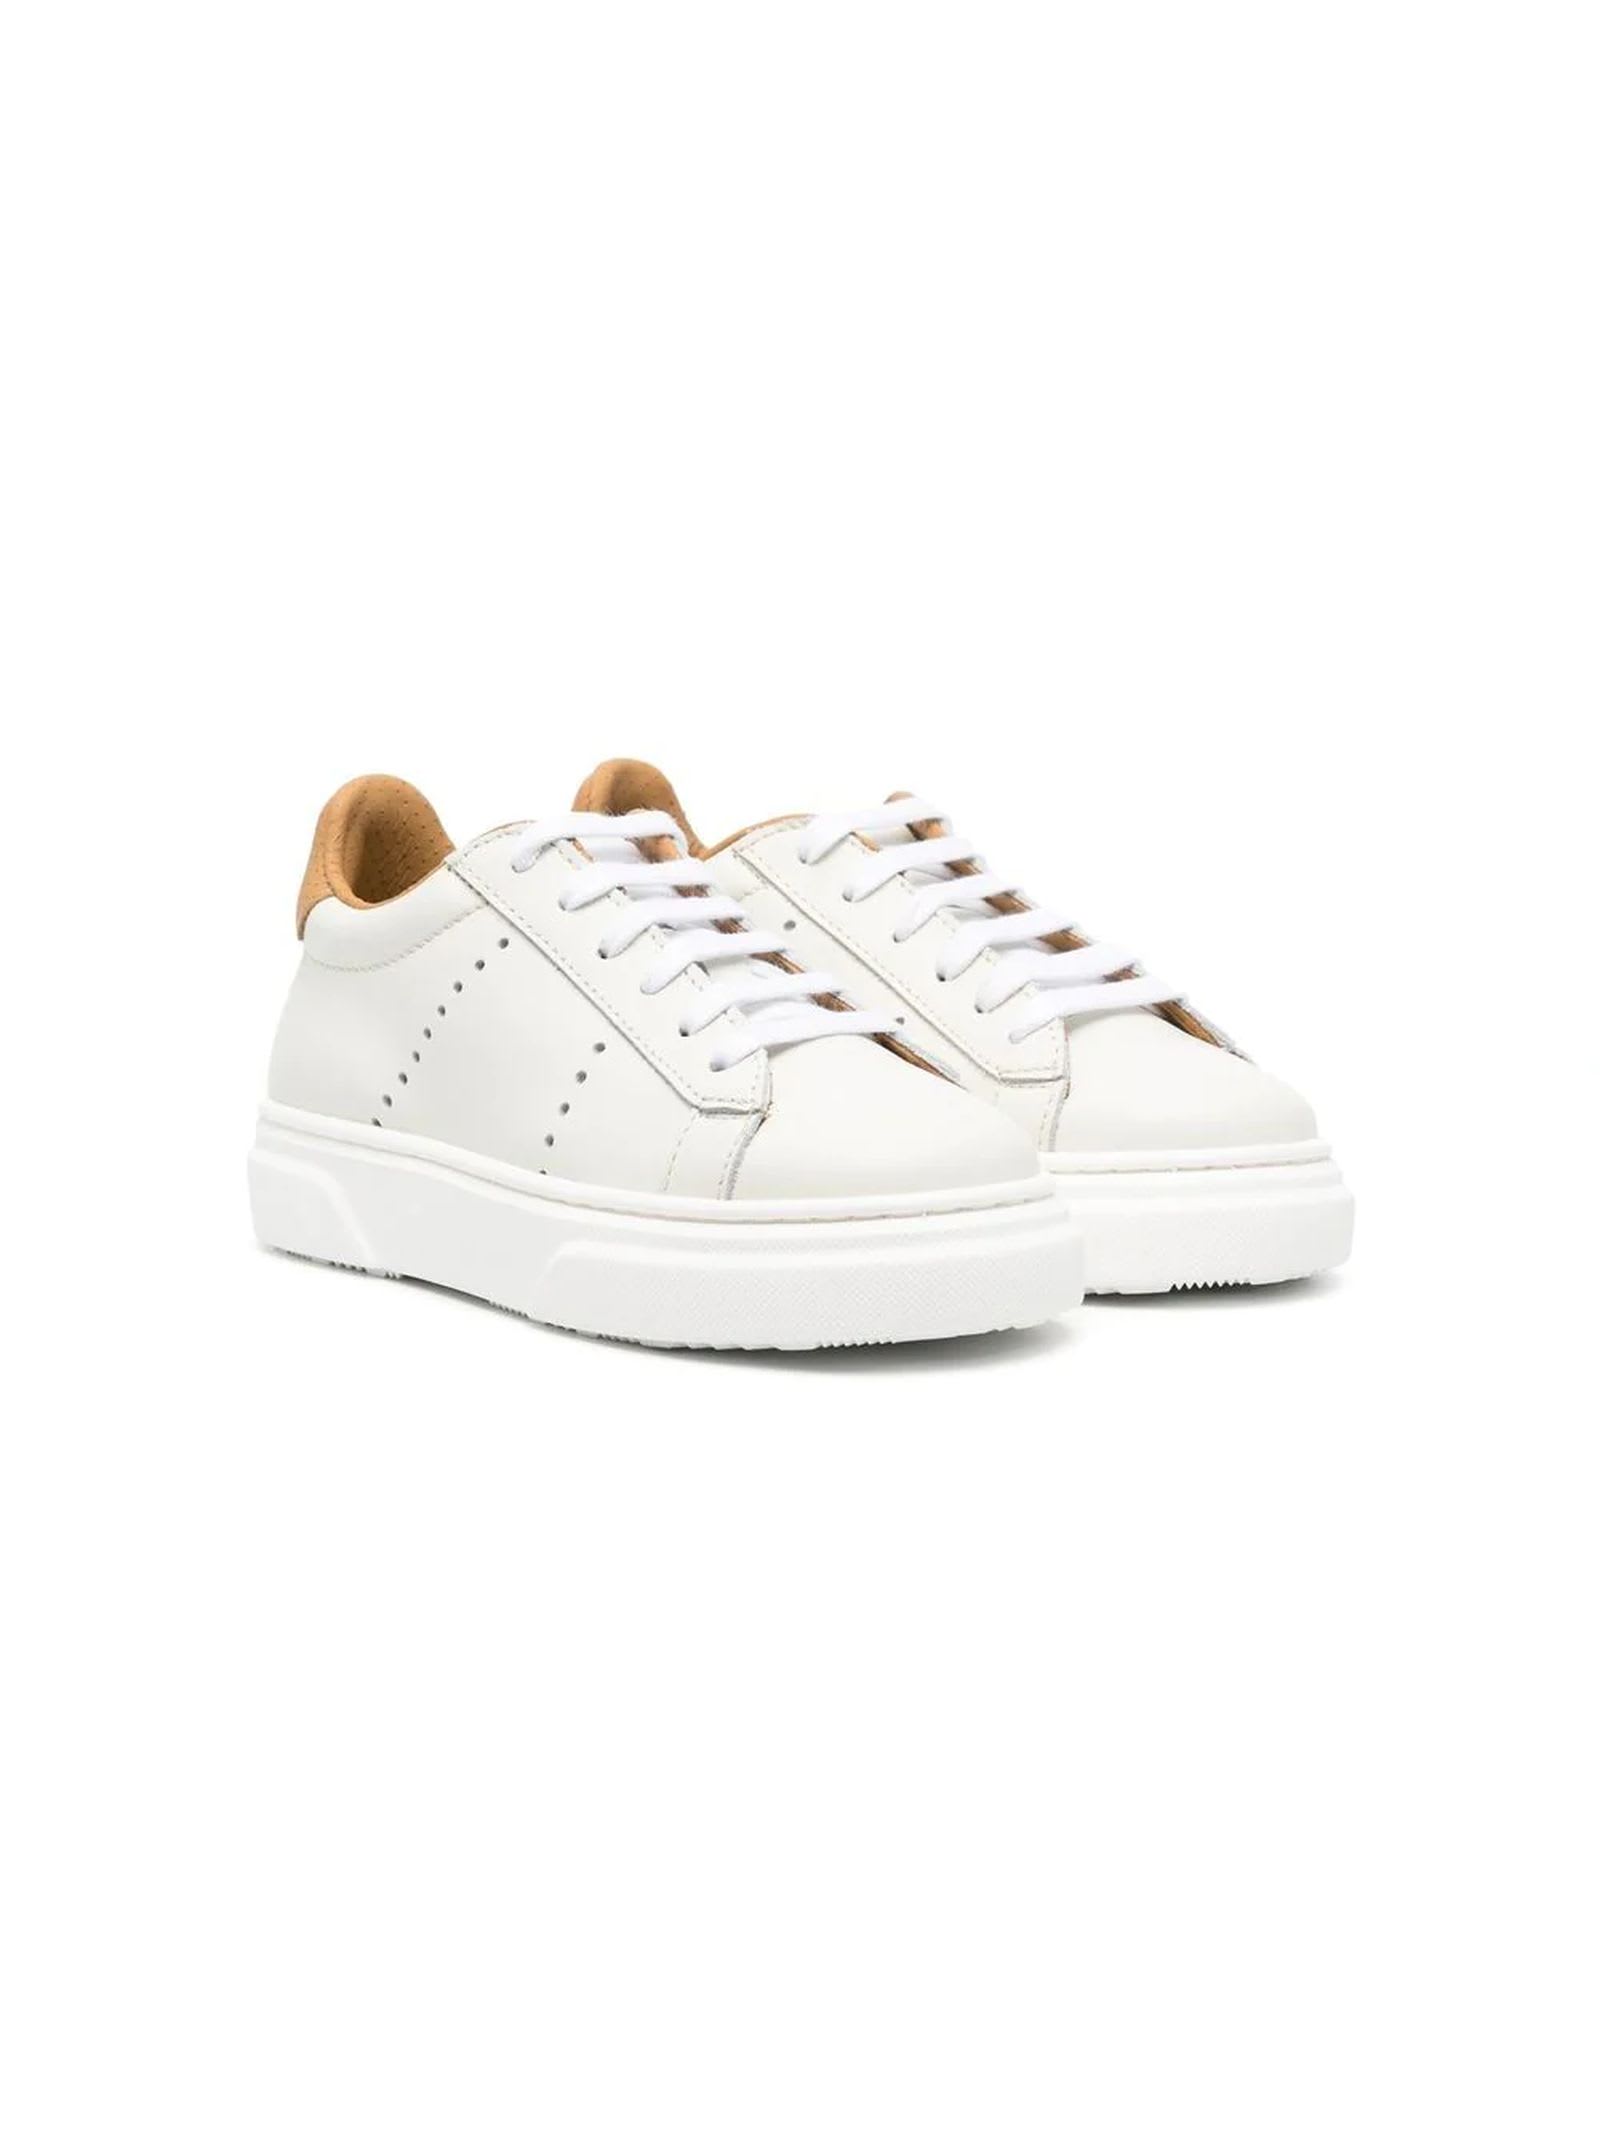 ELEVENTY WHITE LEATHER SNEAKERS